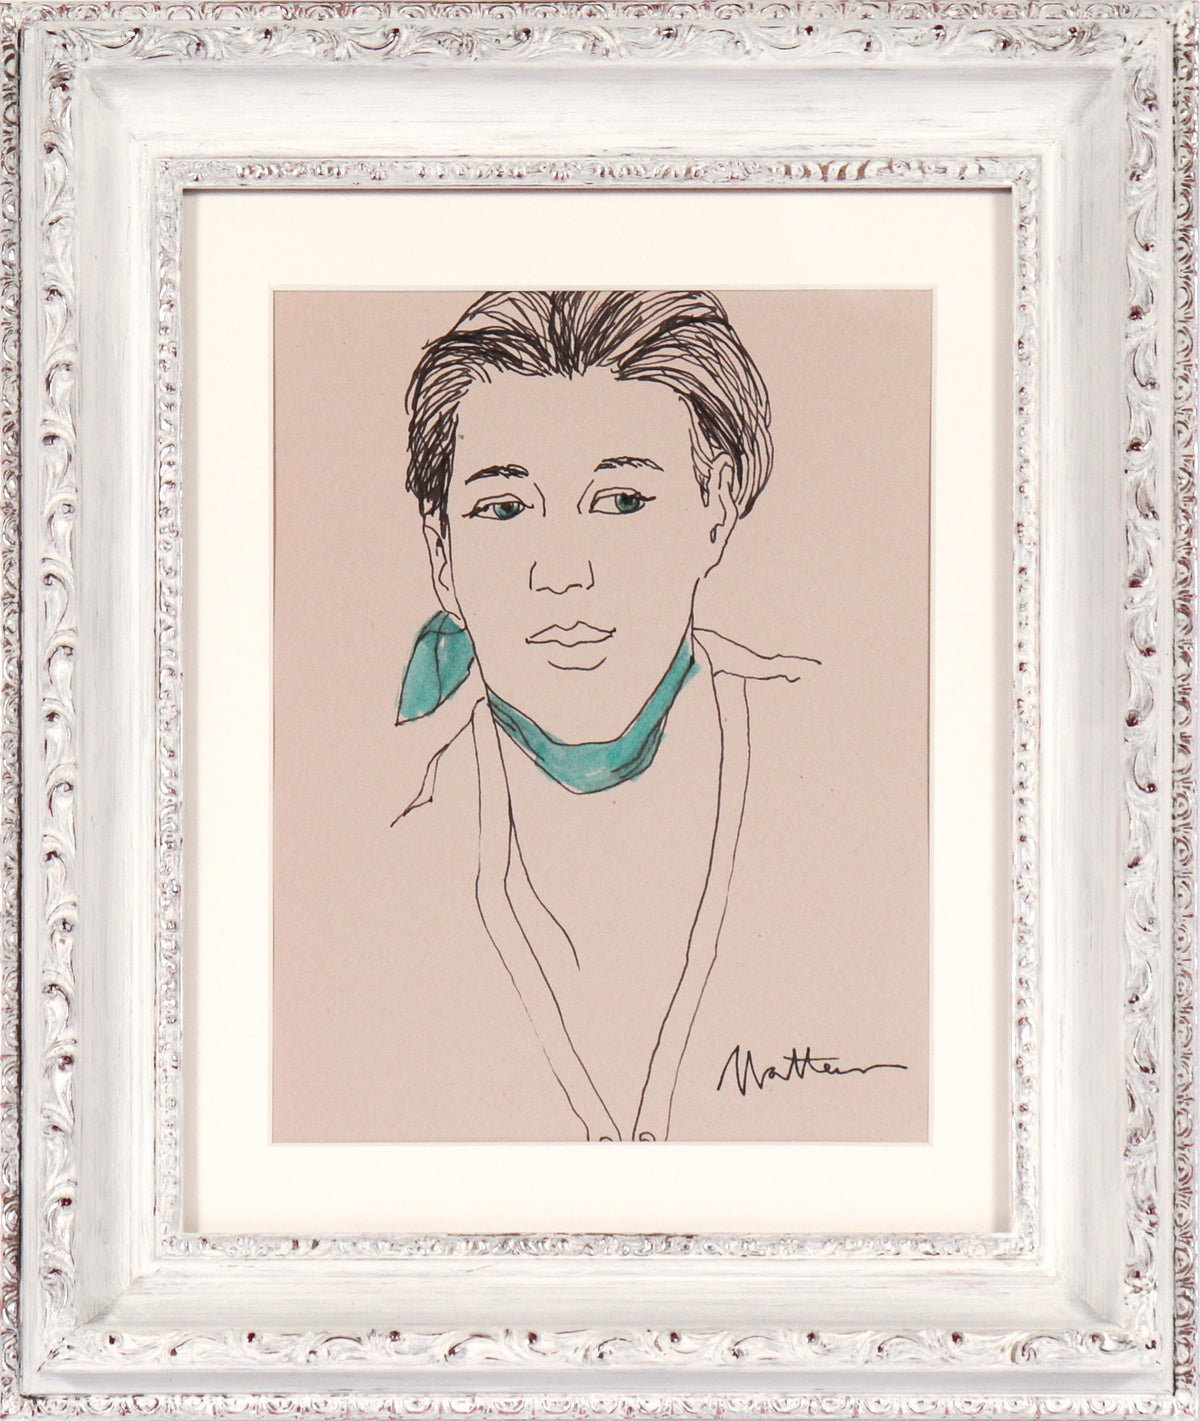 Portrait of a Woman in a Blue Scarf&lt;br&gt;20th Century Ink&lt;br&gt;&lt;br&gt;#29605